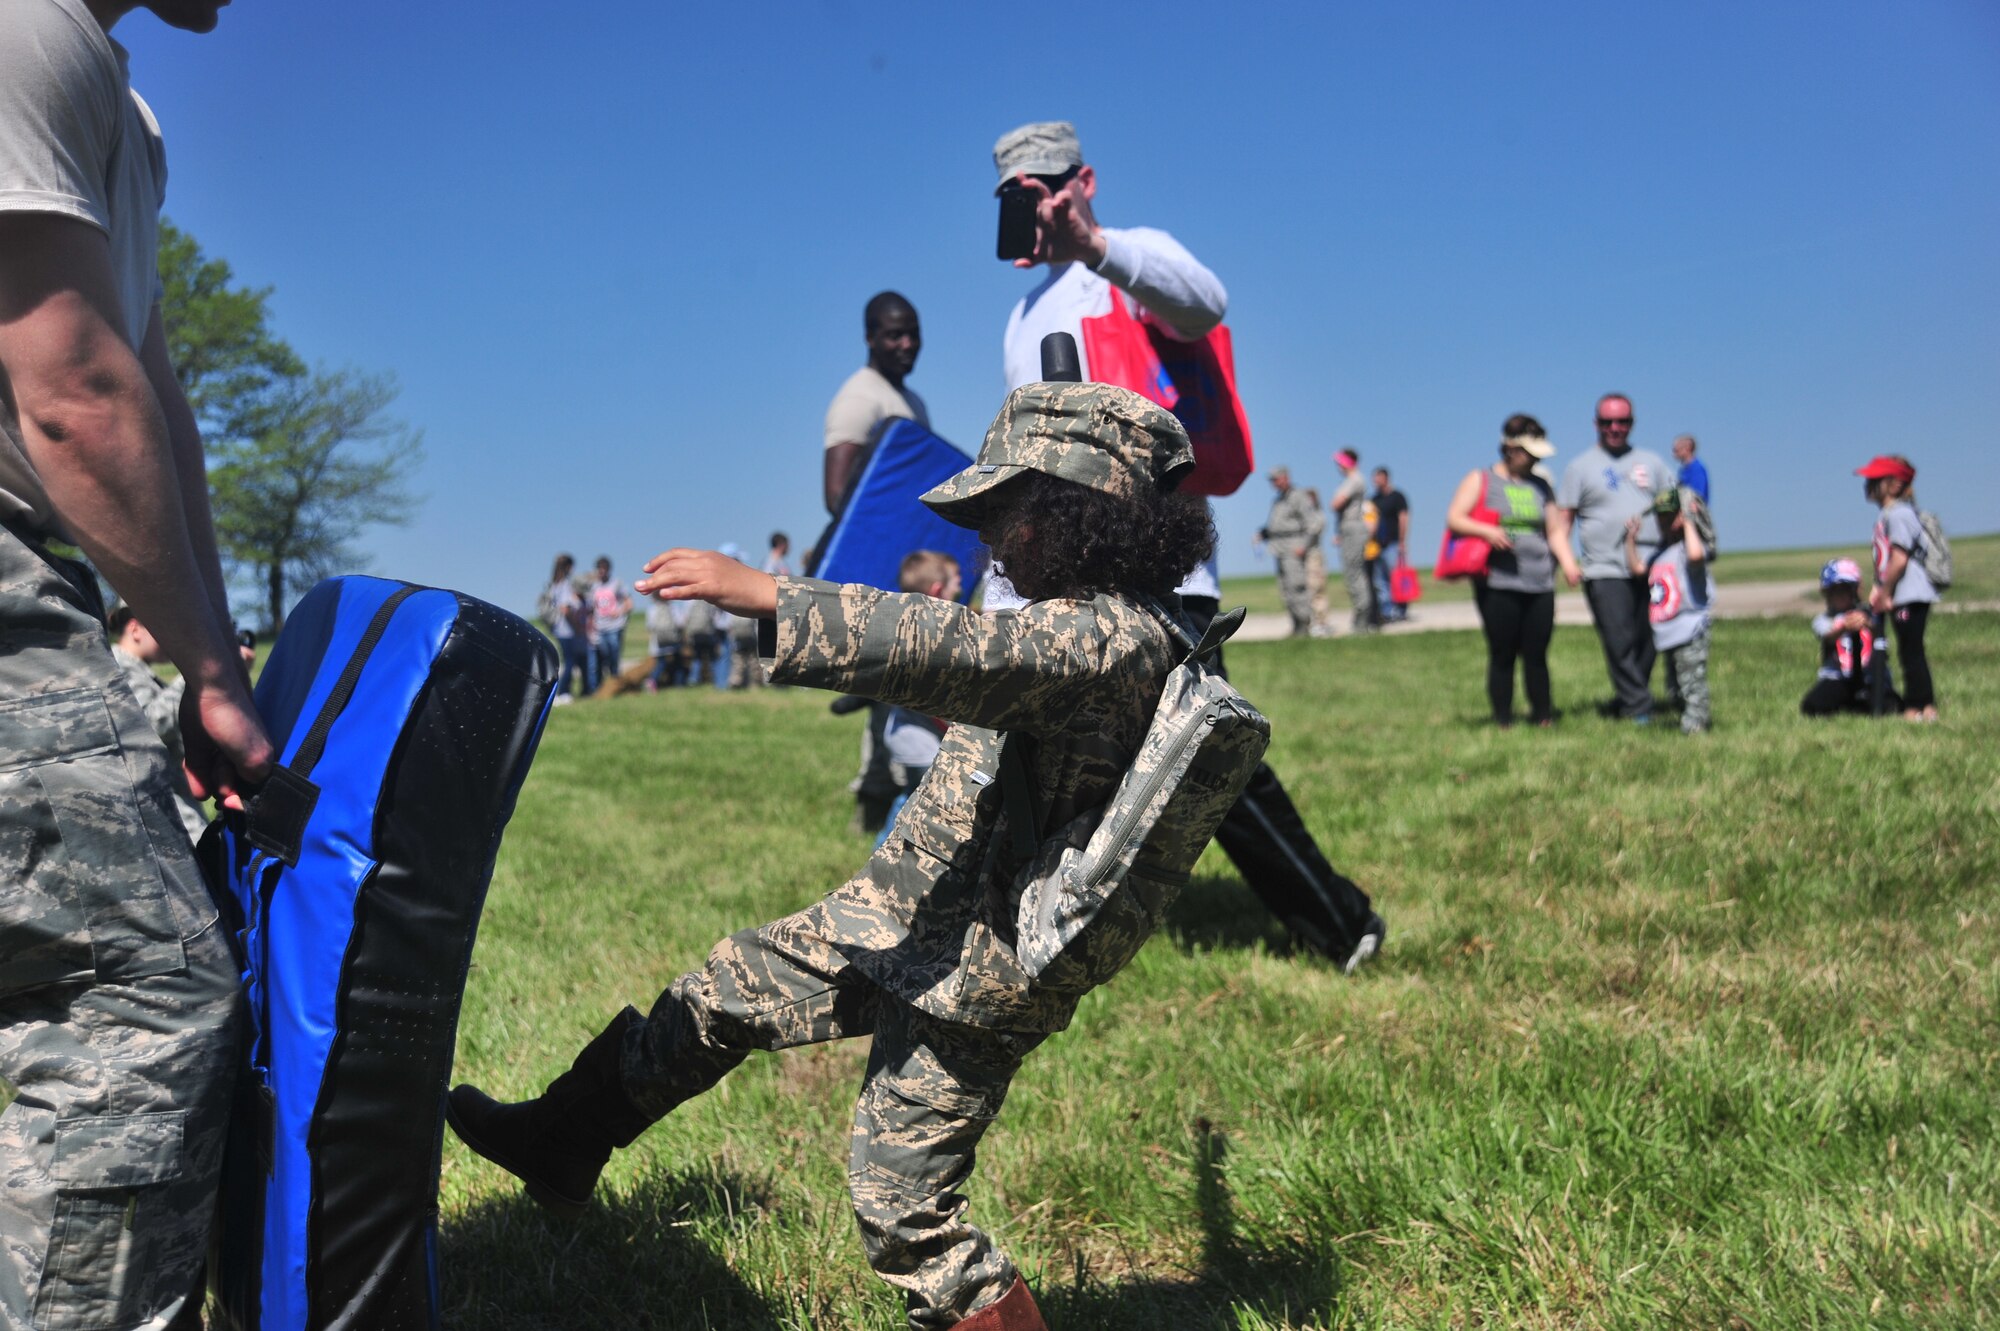 Arissa Hale, daughter of Aris Hale, the base equipment custodian officer assigned to the 509th Communications Squadron, practices her combative techniques at Whiteman Air Force Base, Mo., April 23, 2016. Combatives was one of several stations youth were able to experience during Operation Spirit. (U.S. Air Force photo by Senior Airman Jovan Banks)